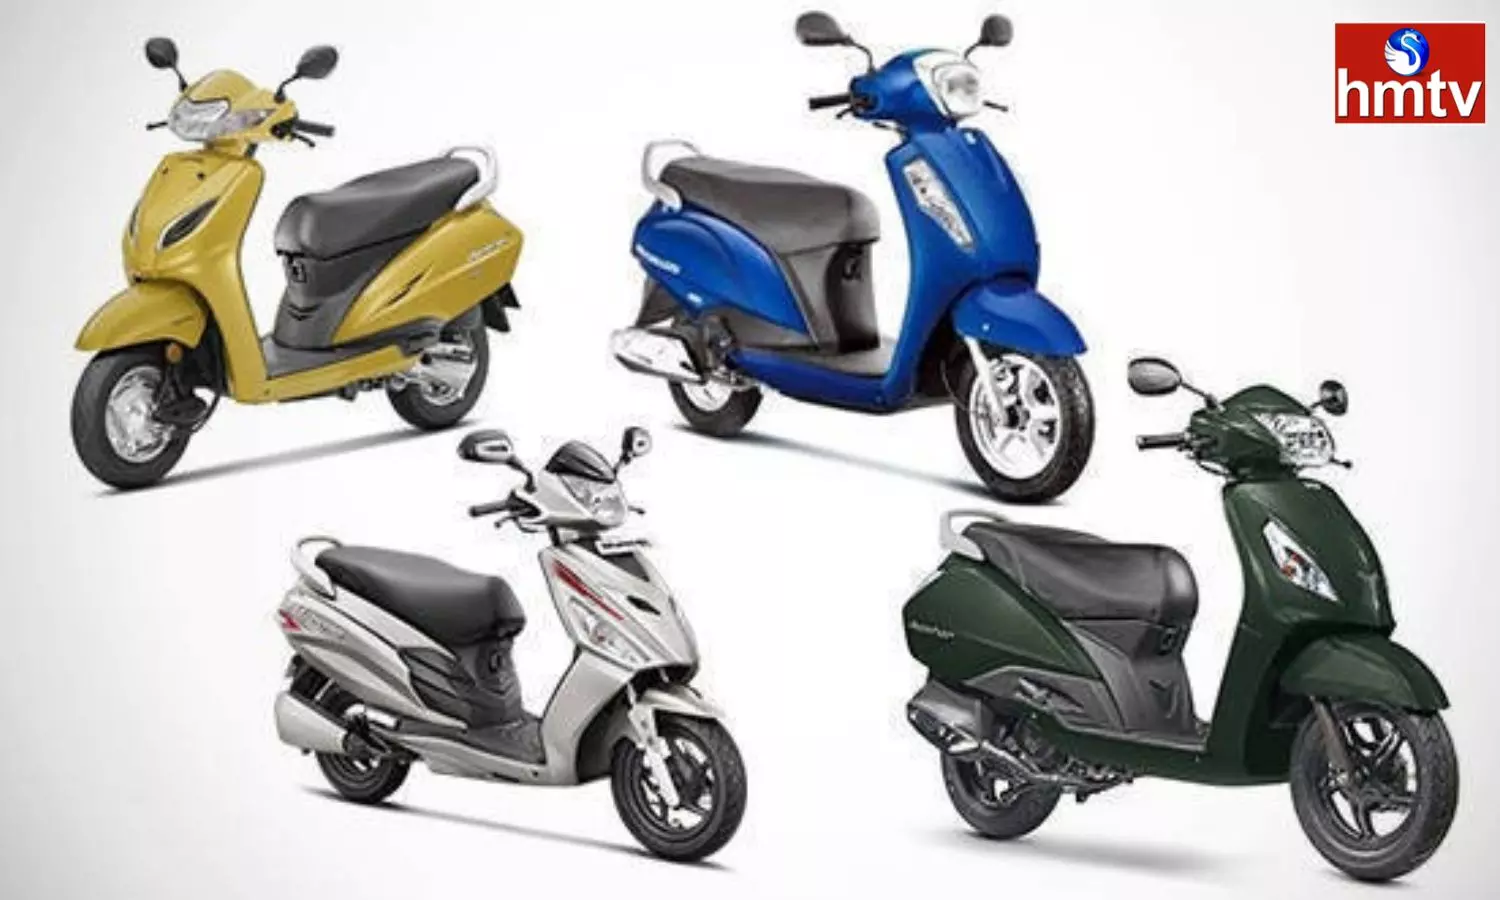 From Honda Activa to tvs Jupiter and Suzuki access these top selling Scooter in India